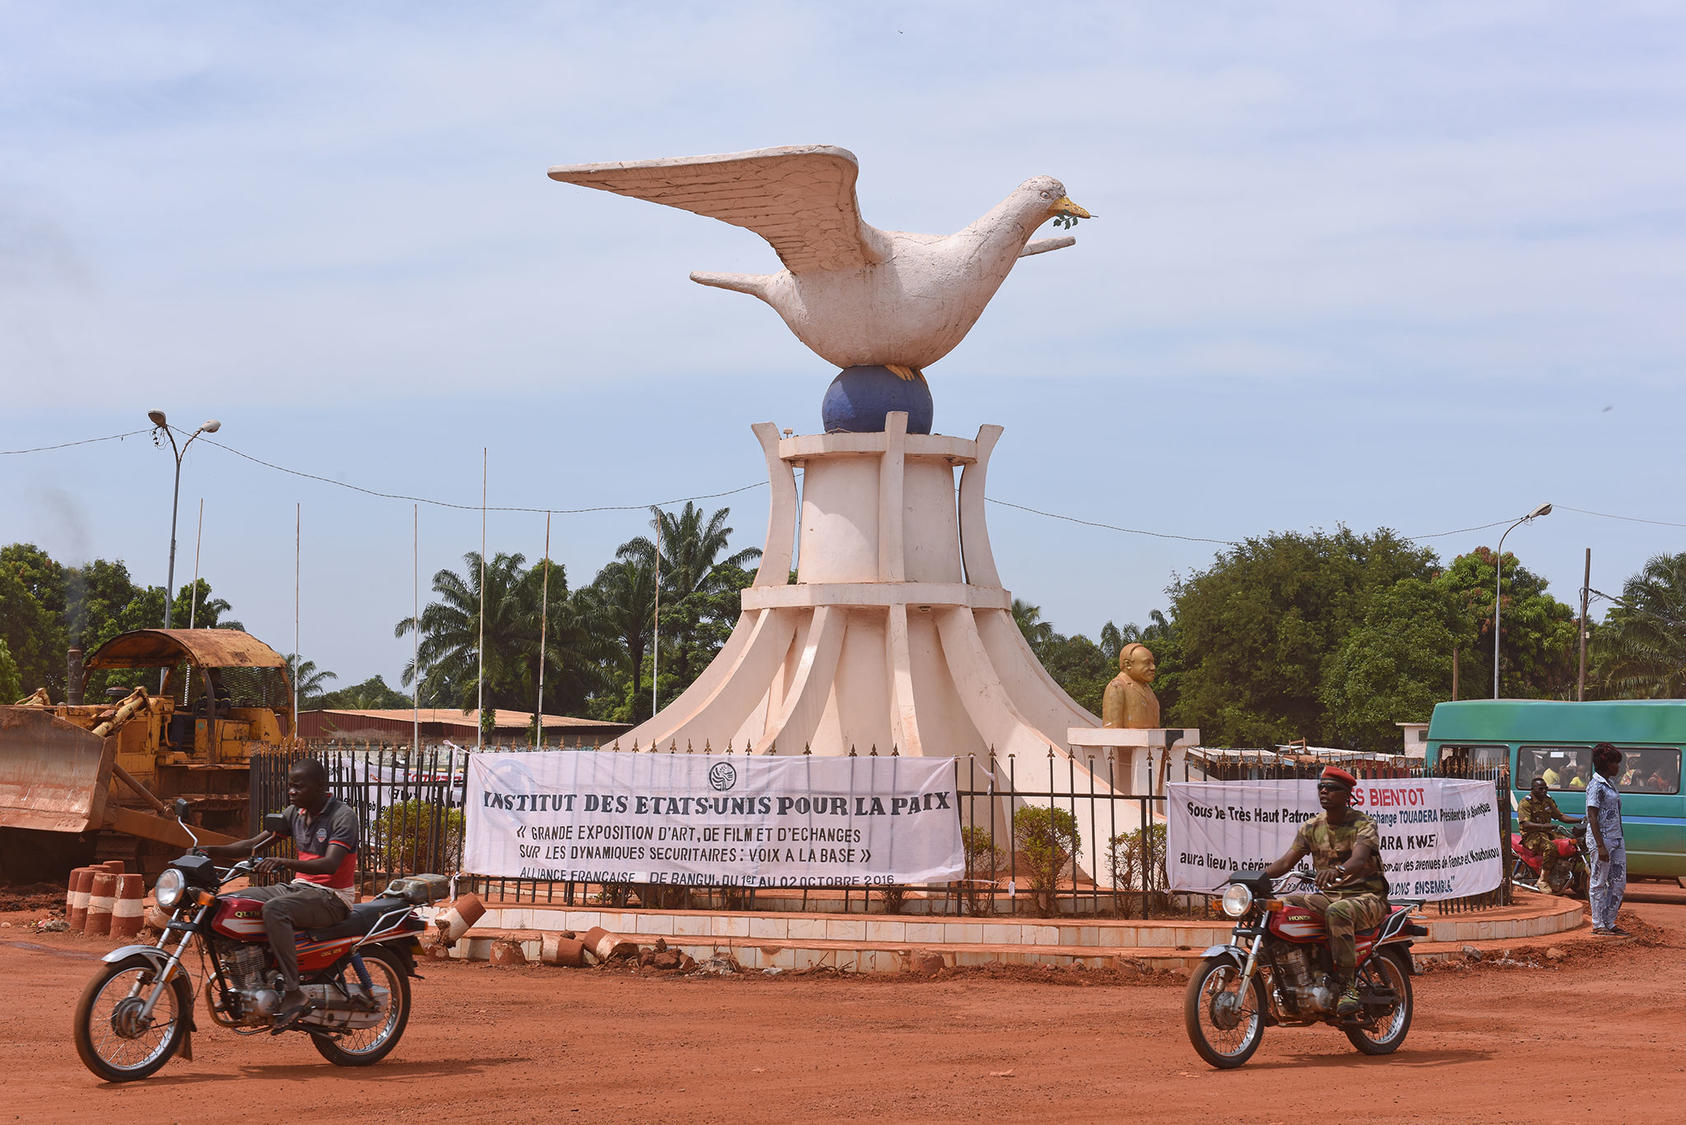 This peace dove statue, marking the Place de la Reconciliation, in Bangui, Central African Republic. The sign reads (in French), "United States Institute of Peace Grand Exhibition of Art, Film, and Exchange," (Photo: USIP)